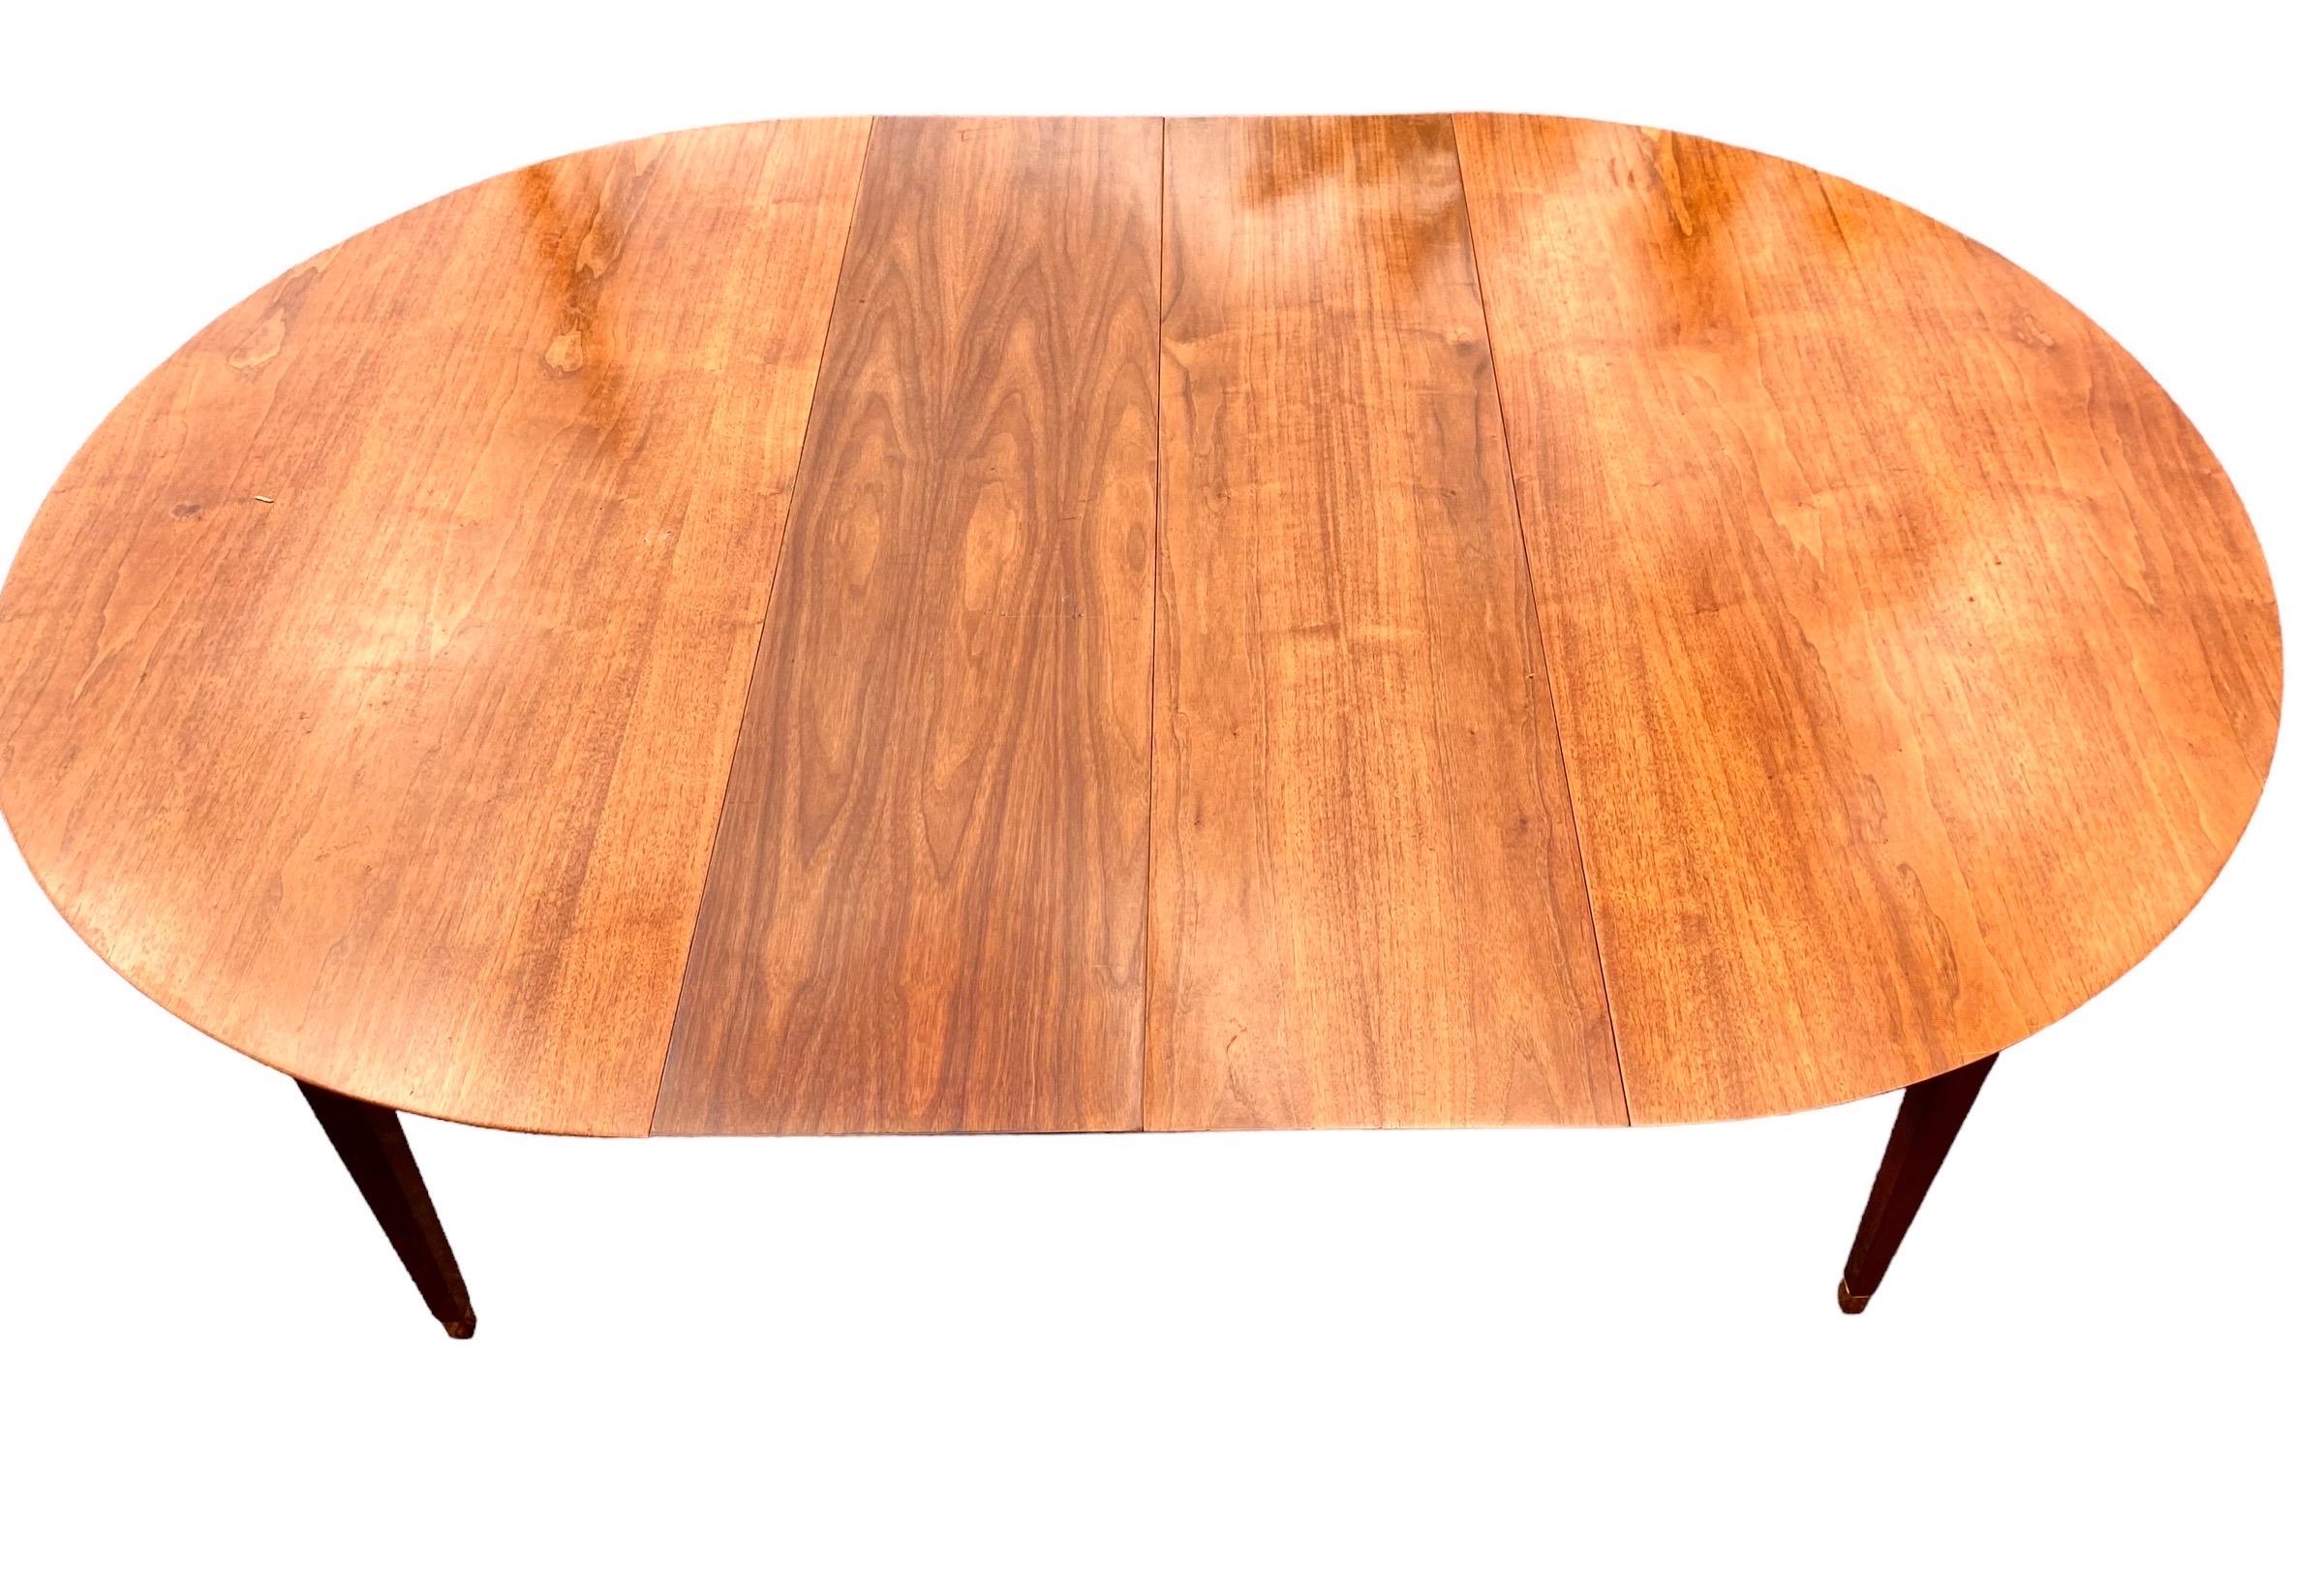 American Mid-Century Modern Teak Dining Table, Two Leaves And Four Chairs